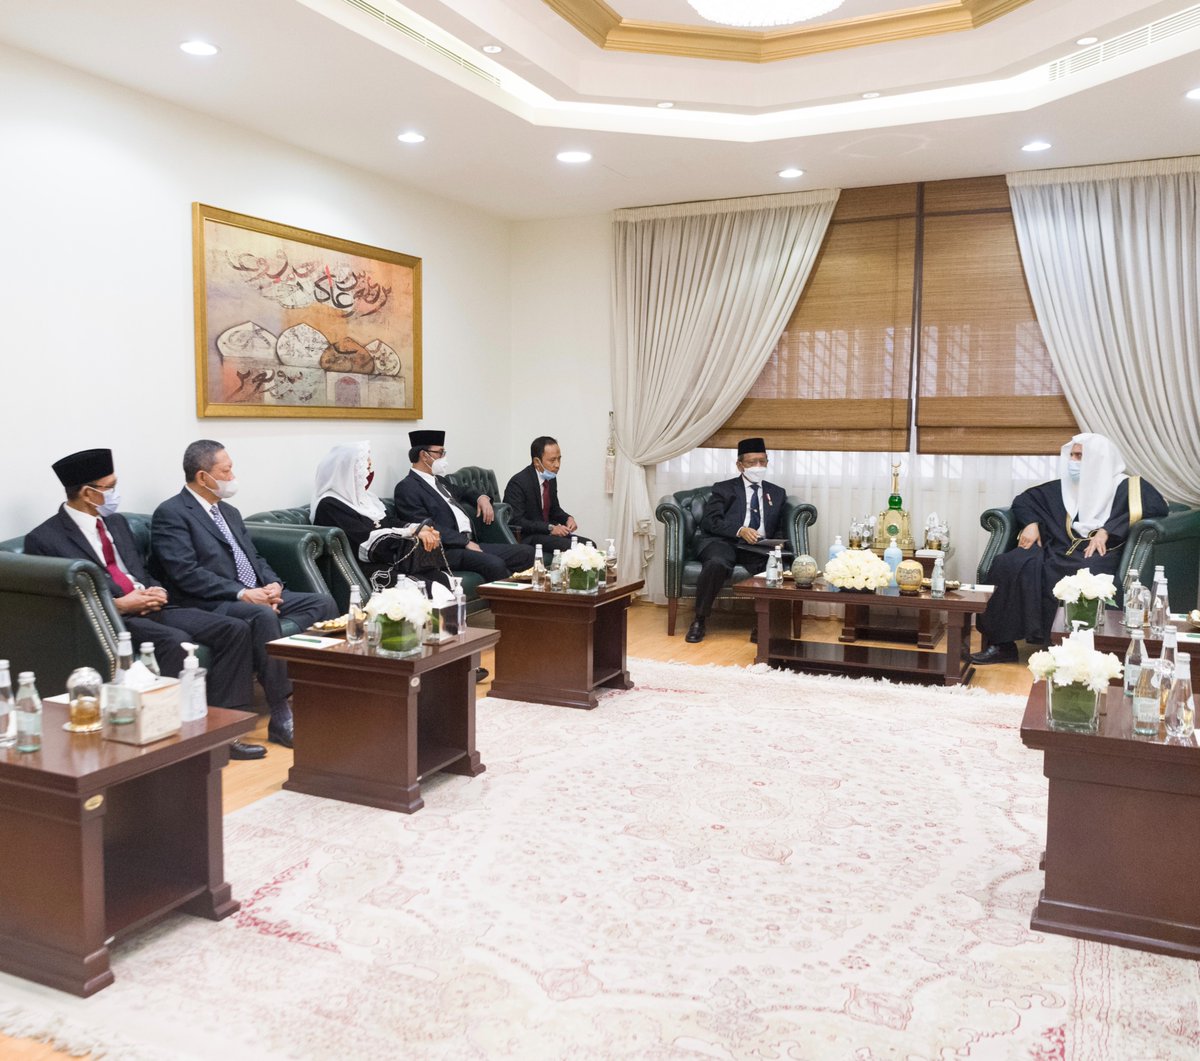 HE Dr. Mohammad Alissa hosted the Coordinating Minister for Political, Legal and Security Affairs of the Republic of Indonesia